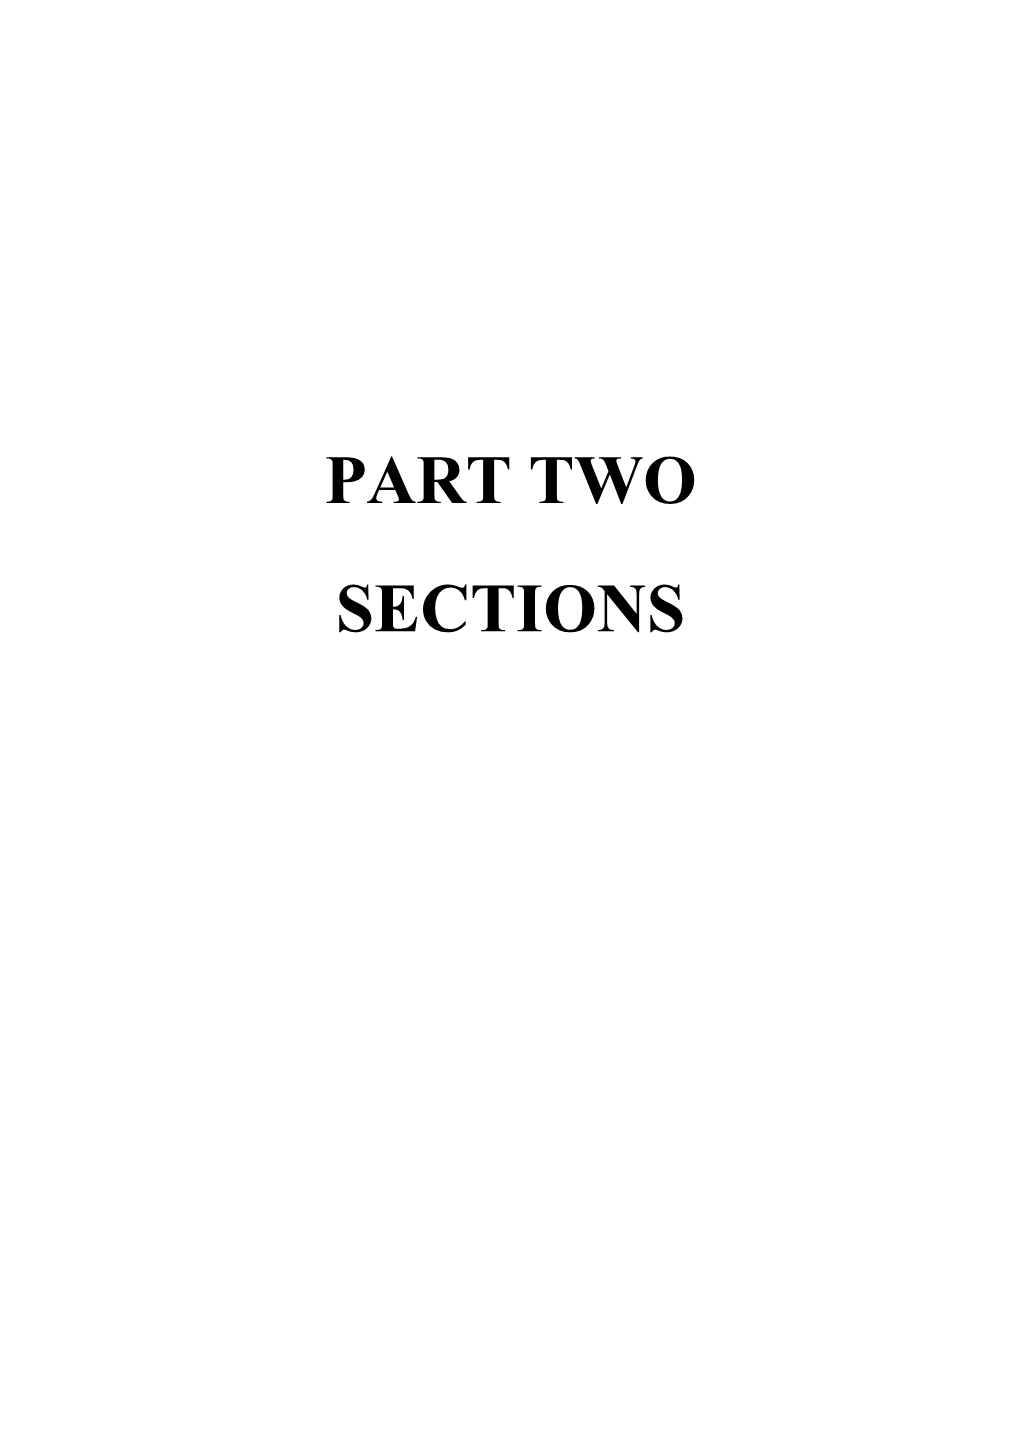 PART TWO SECTIONS Section 1 Formation of Intensive Economic Society